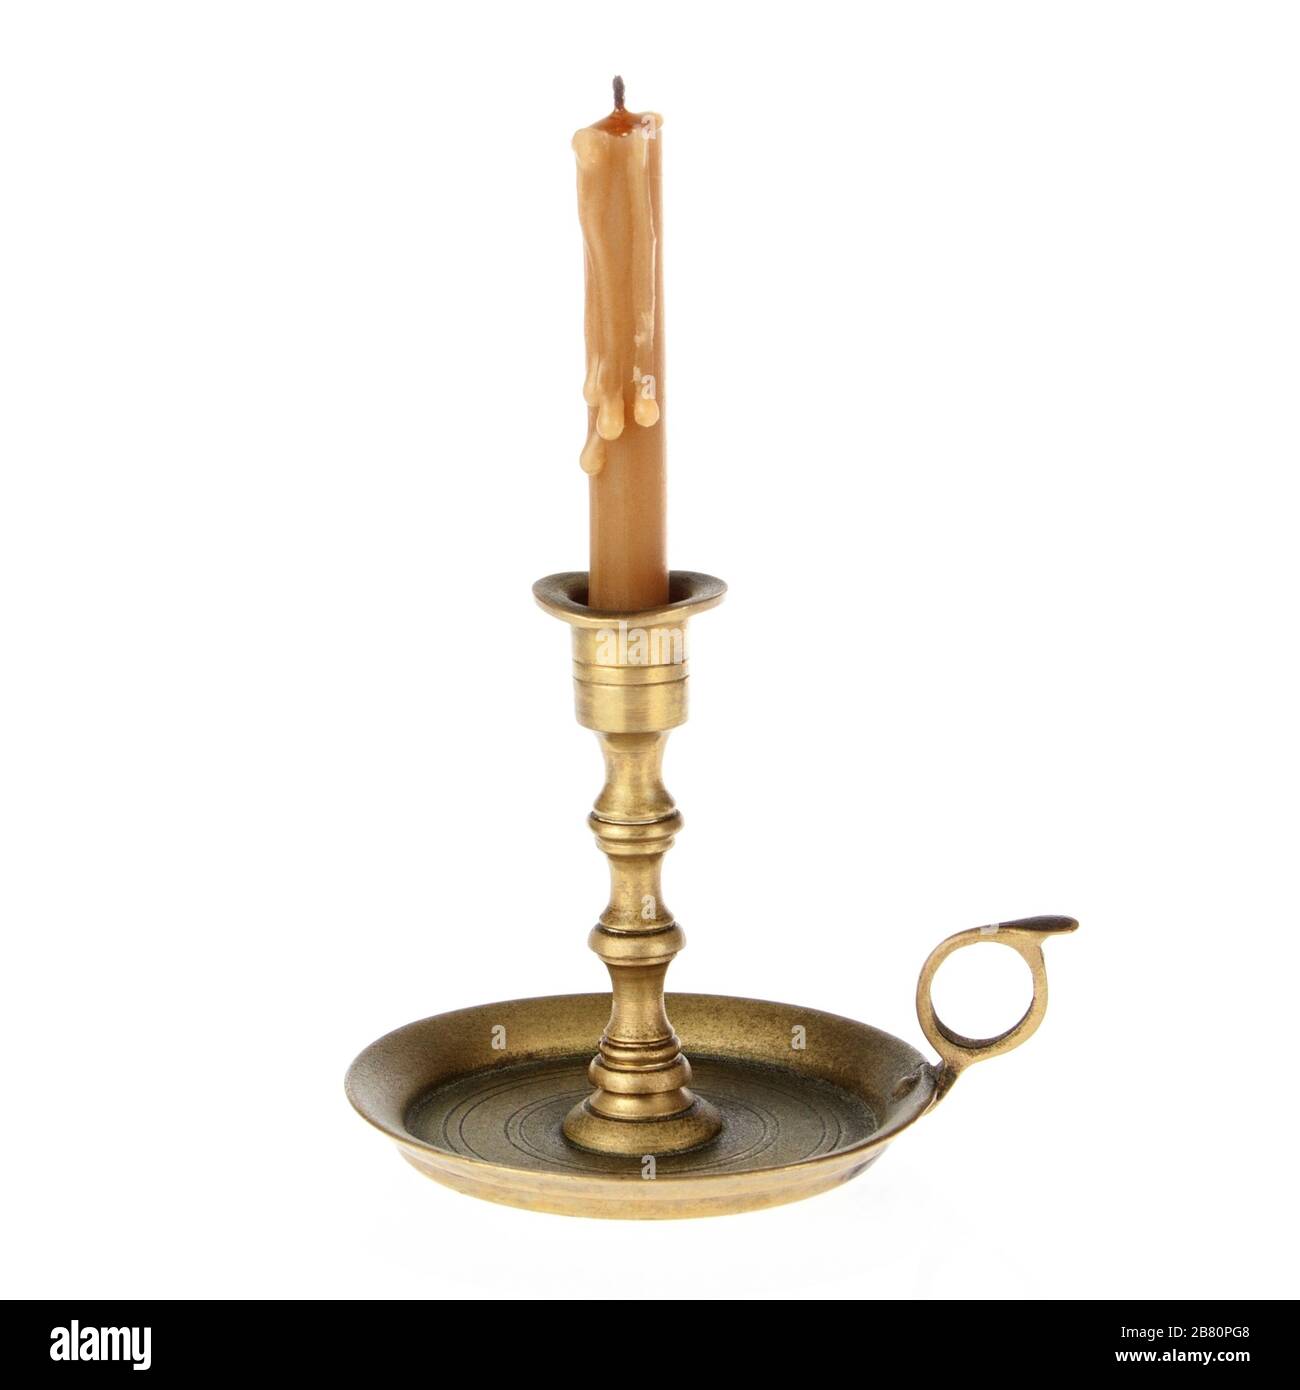 Vintage Antique Style Wood Handle Brass Chamberstick Candle Holder